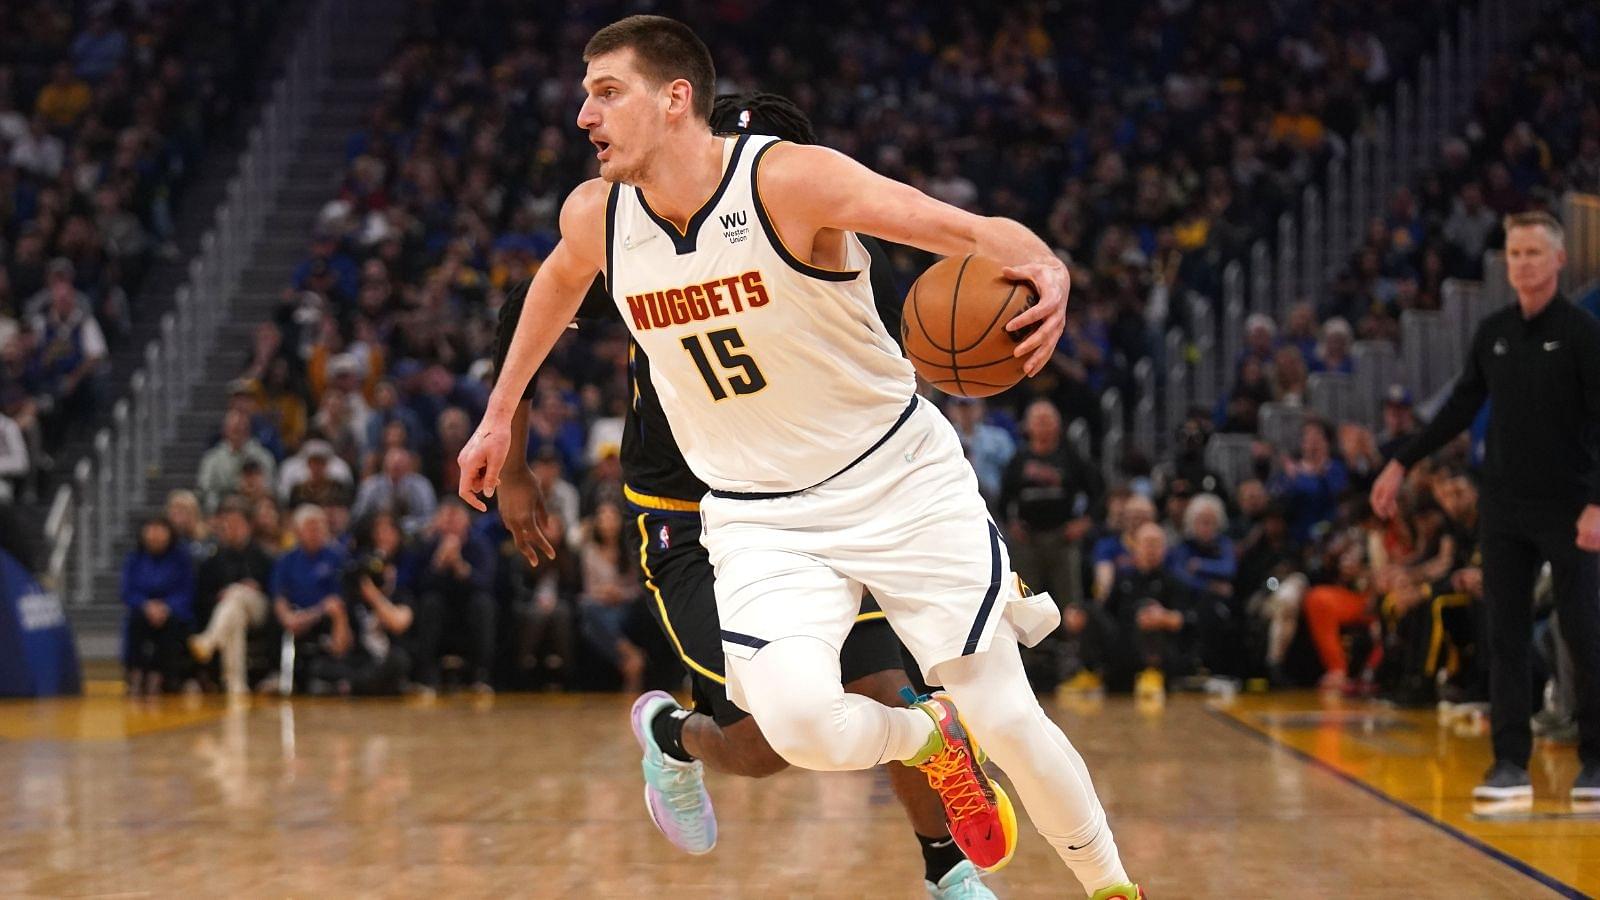 "This sh*t is and has been about skill, not some Nikola Jokic equation you came up with": NBA Twitter obliterates The Joker for his team's bad performance in first game of Playoffs against Warriors